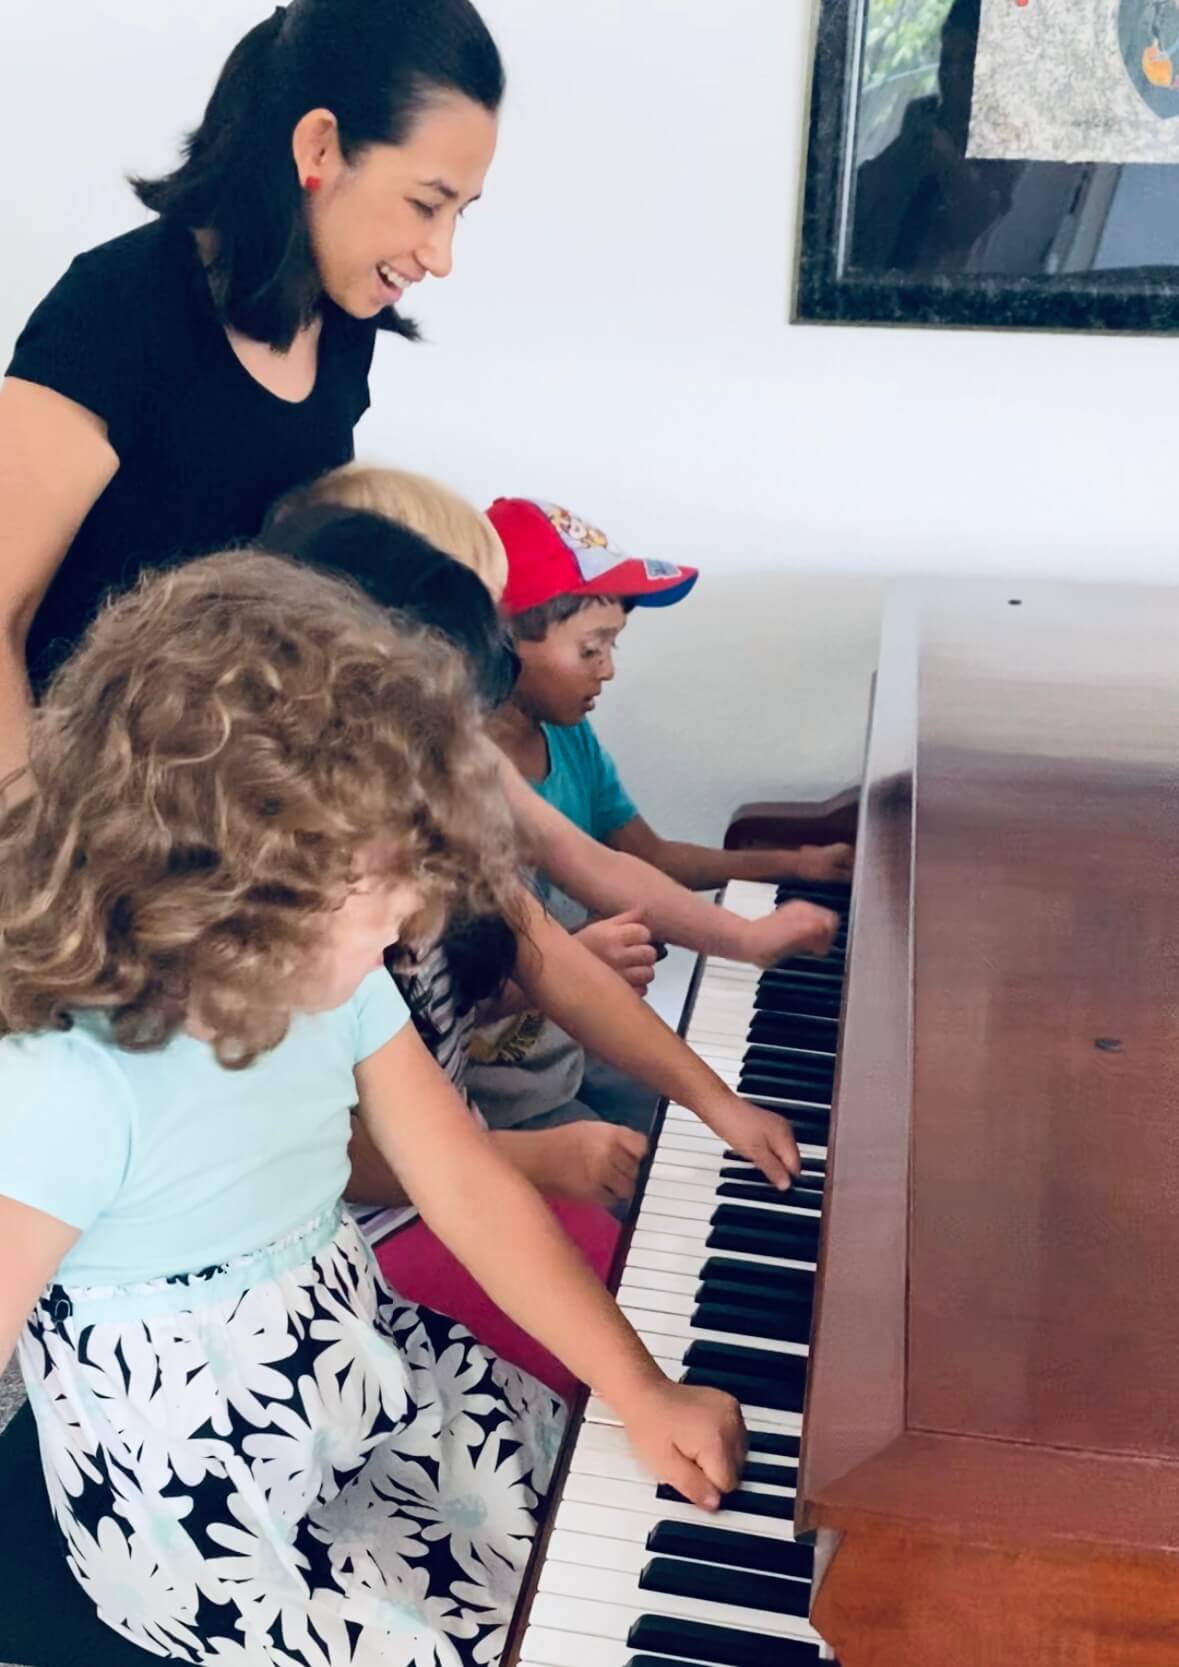 <img src="Engaging-preschool-group-piano-lessons-1.jpeg" alt="Children exploring piano keys while playing. ">